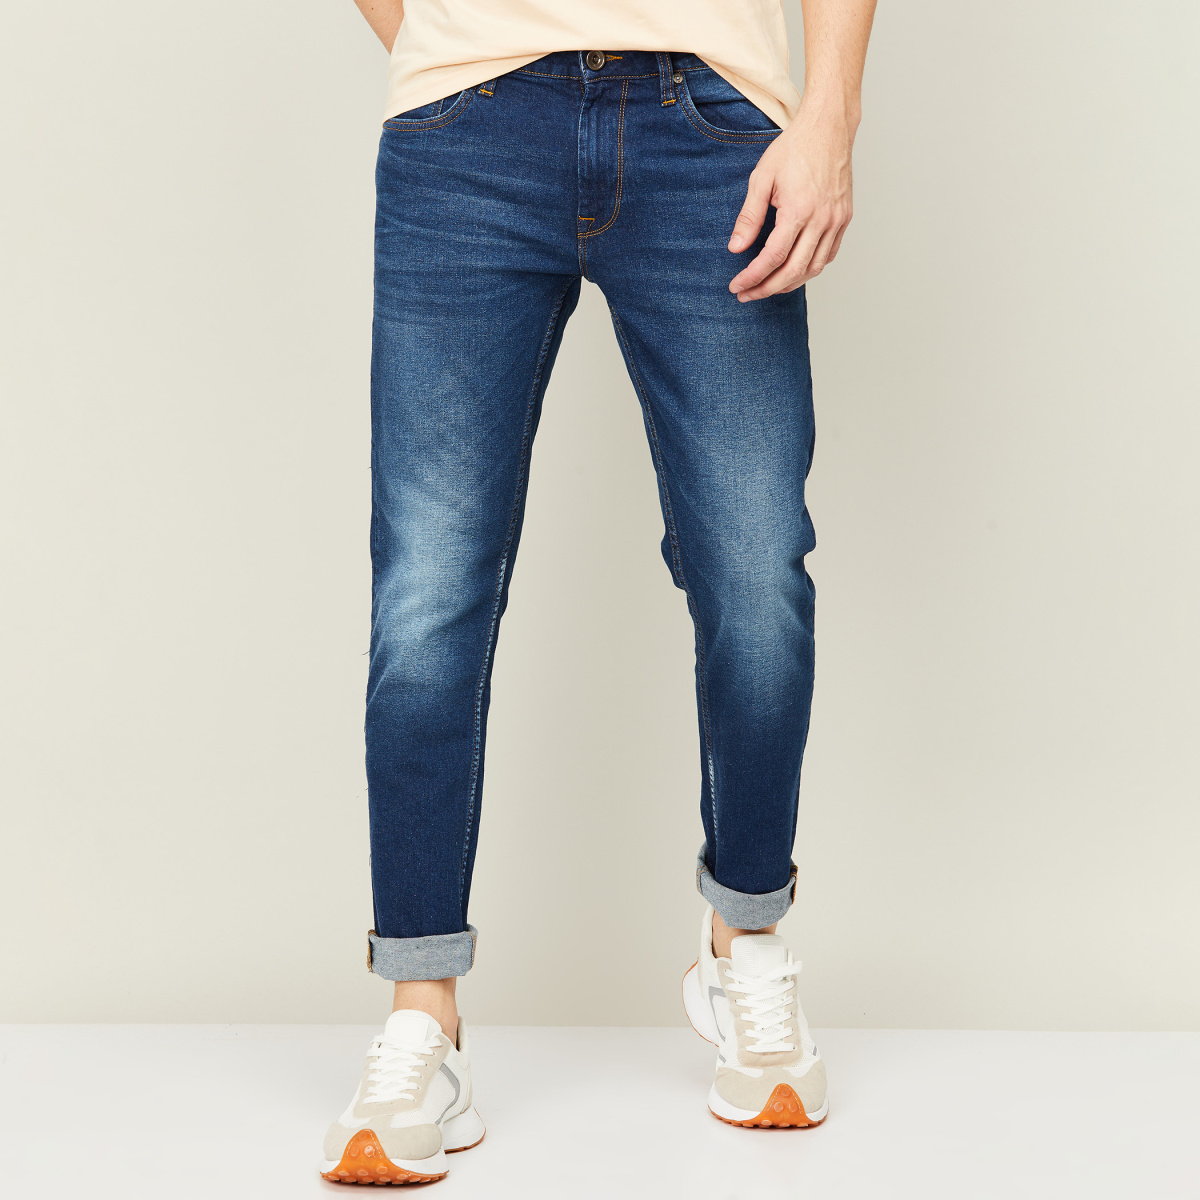 VOI JEANS Men Stonewashed Skinny Fit Jeans